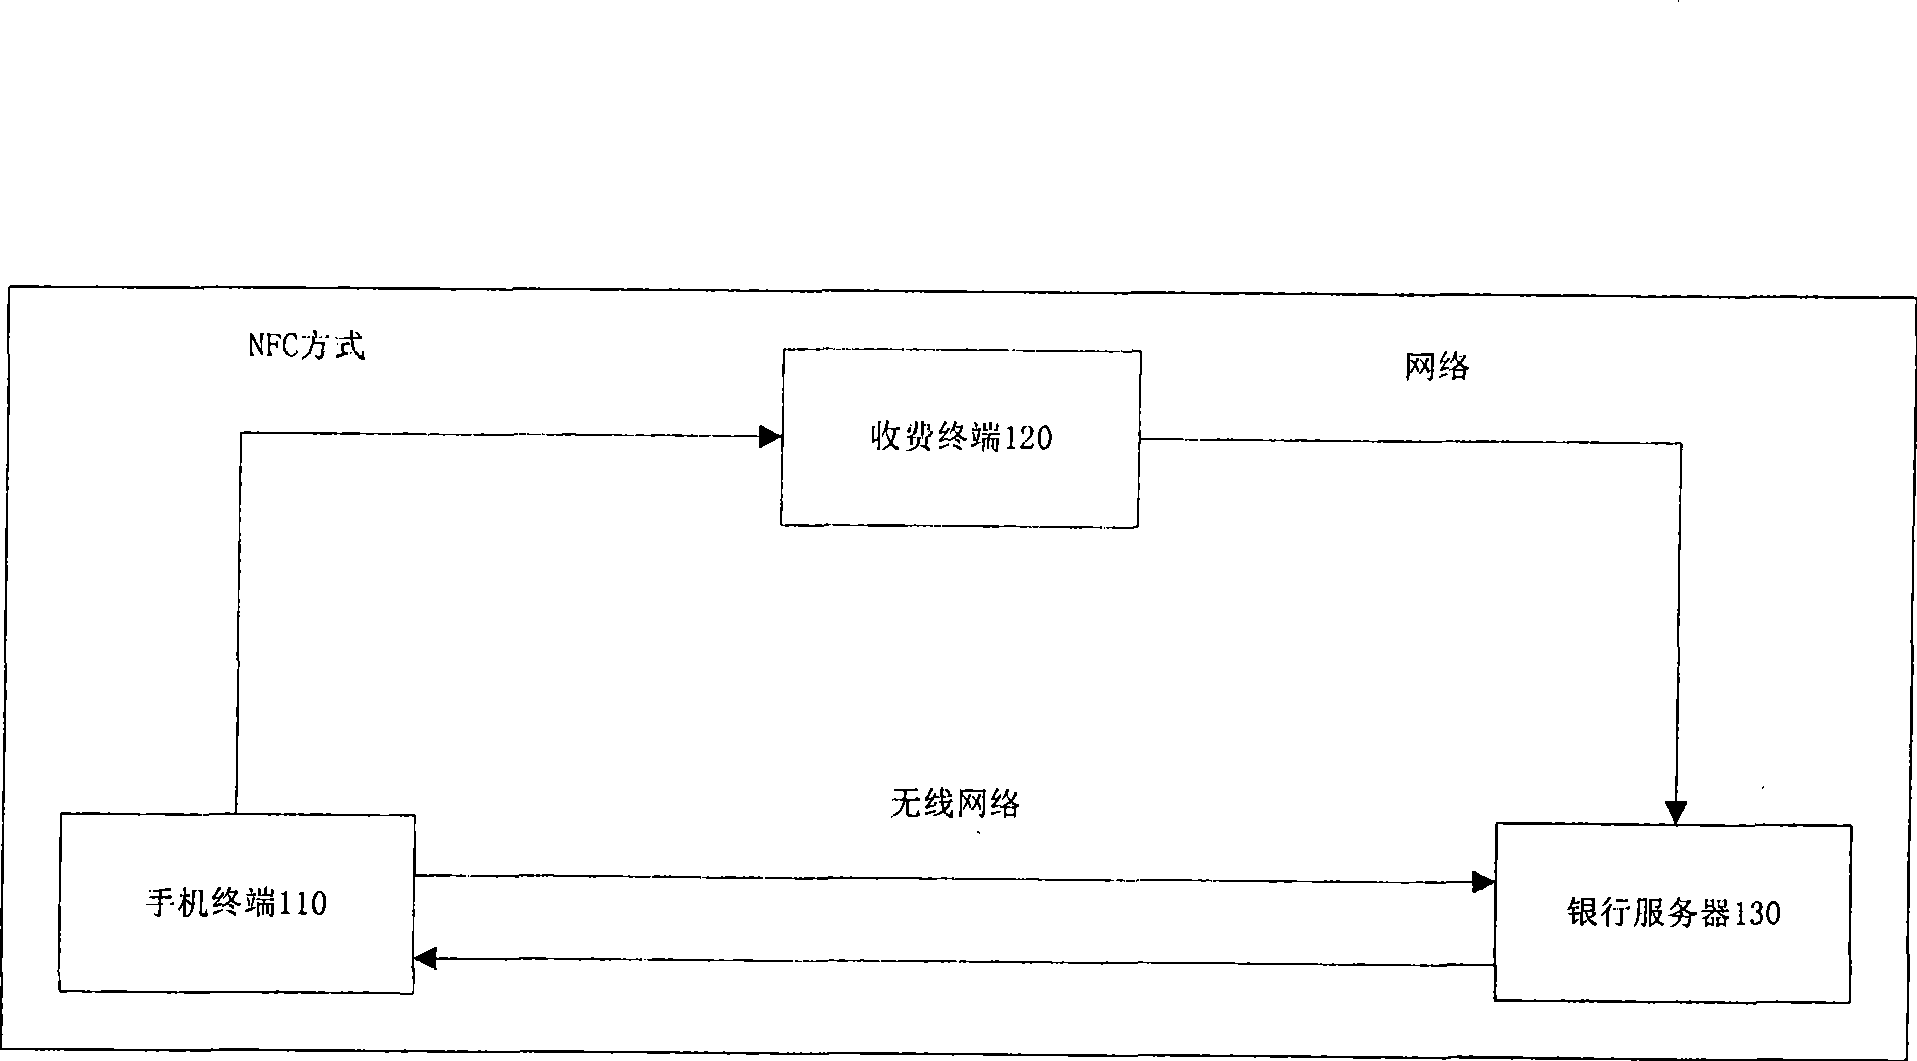 Mobile phone payment authentication system and method based on audio watermark